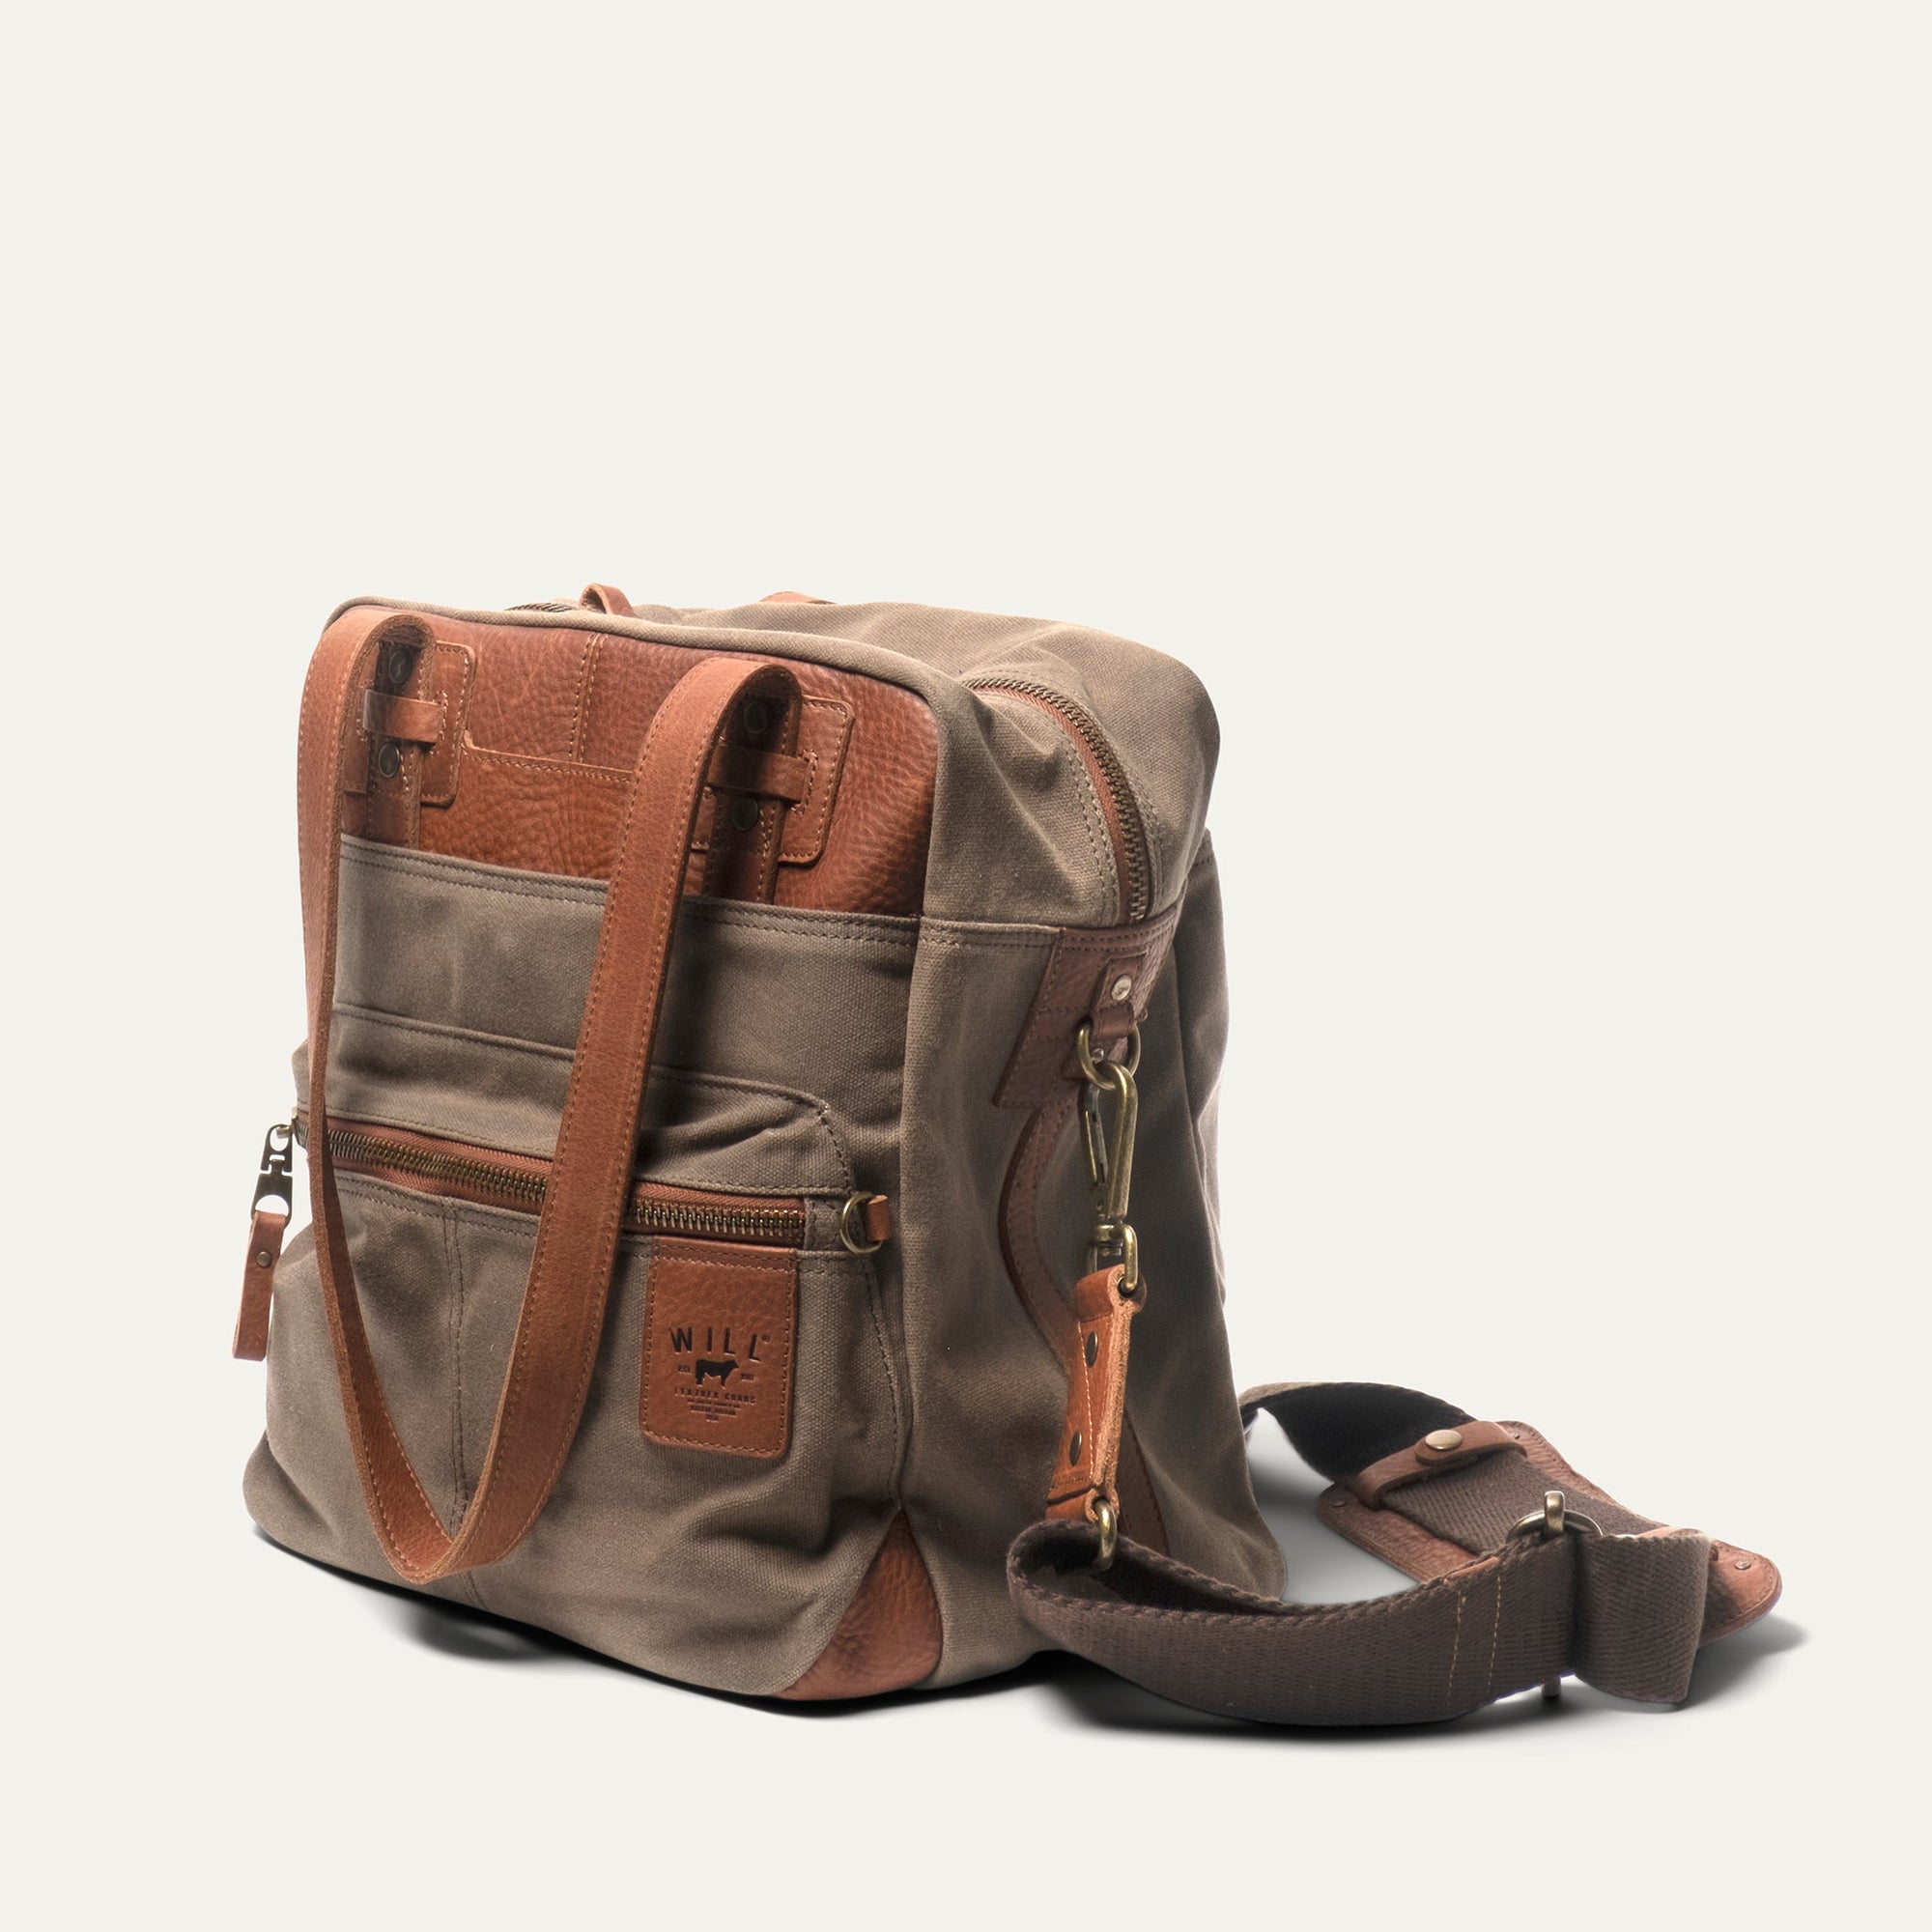 Waxed Canvas and Leather 'Adventure Collection' Onward Tote in Tobacco & Mahogany by Will Leather Goods